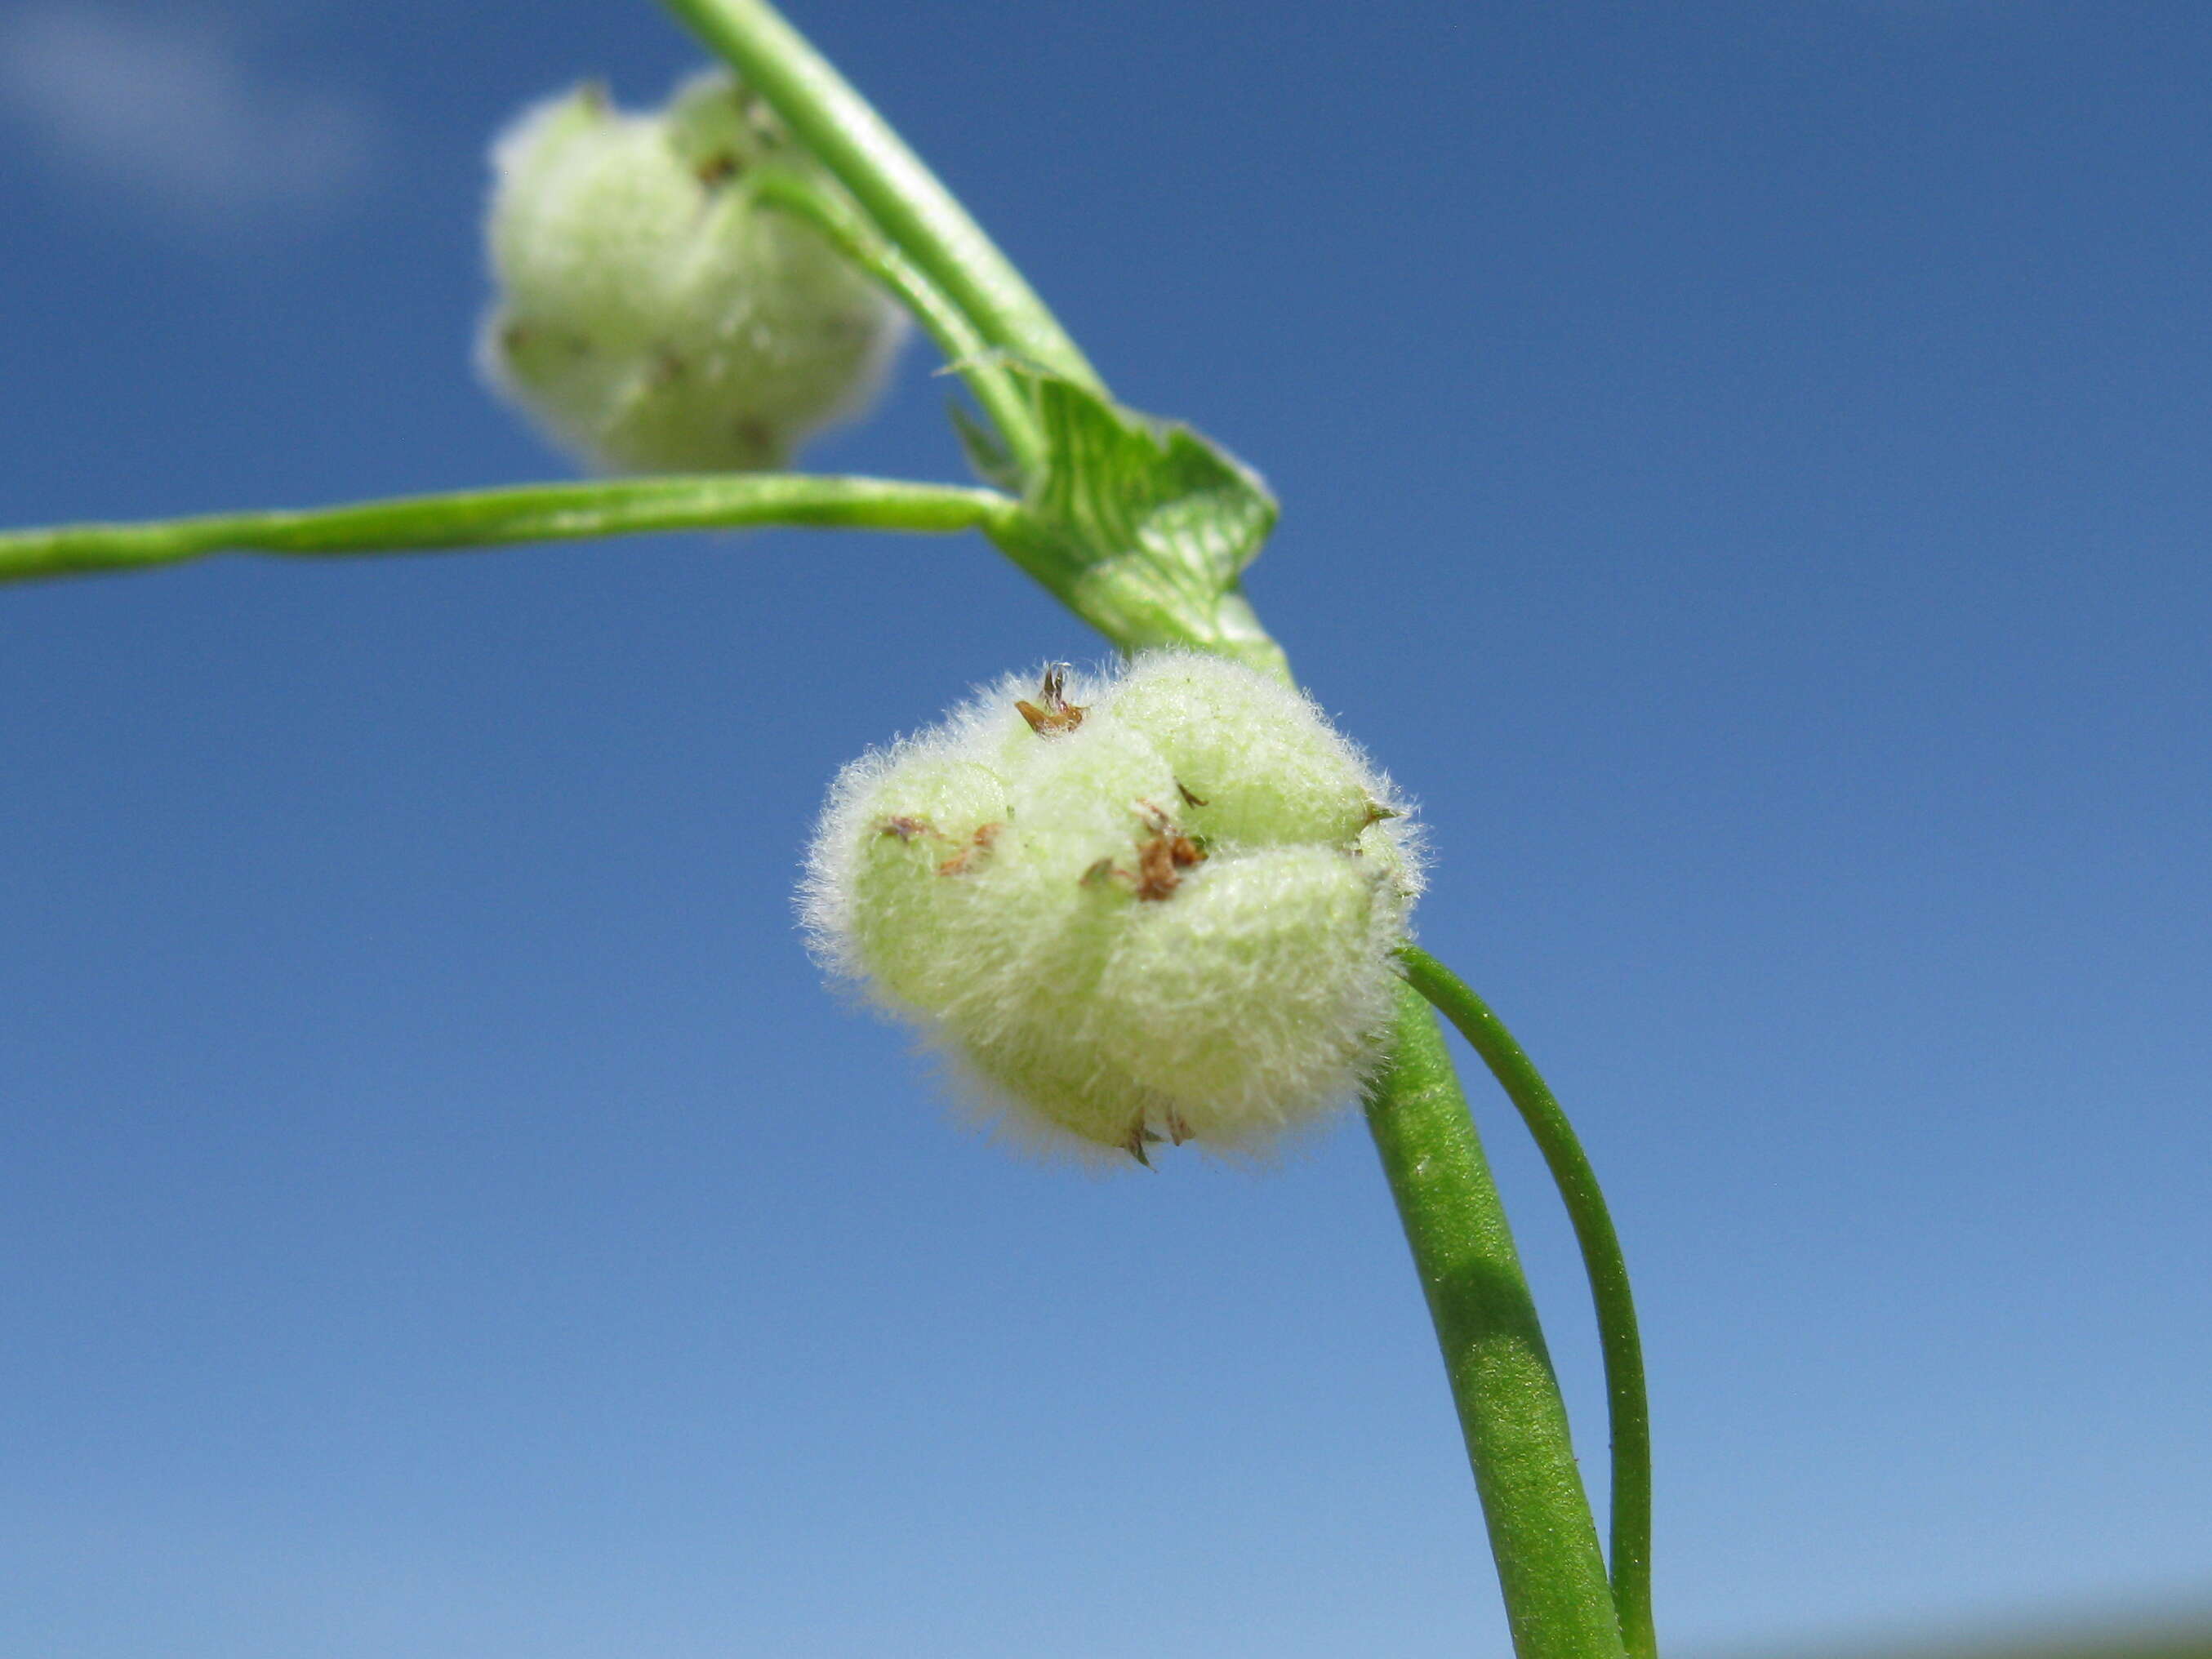 Image of woolly clover